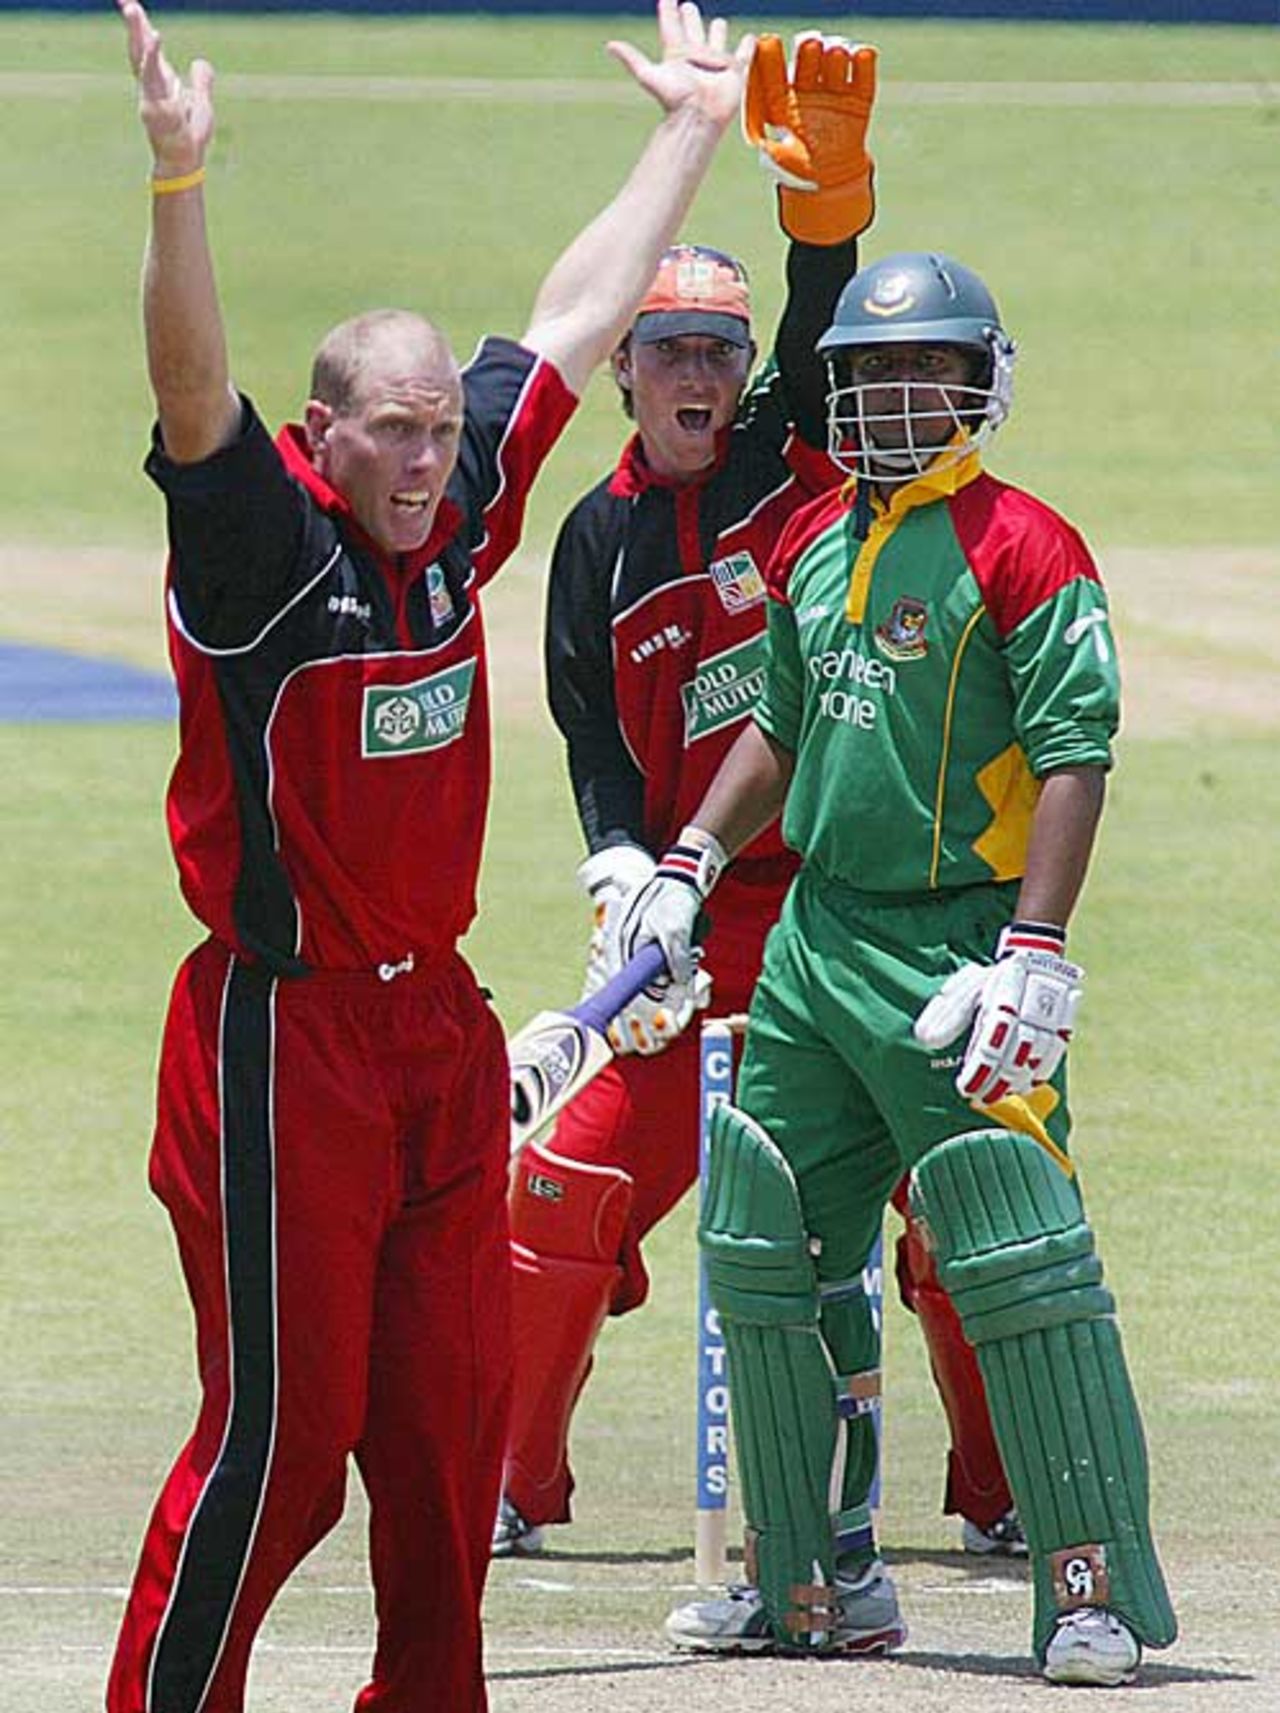 Gary Brent appeals during a spell that brought one wicket, Zimbabwe v Bangladesh, 3rd ODI, Harare, February 9, 2007